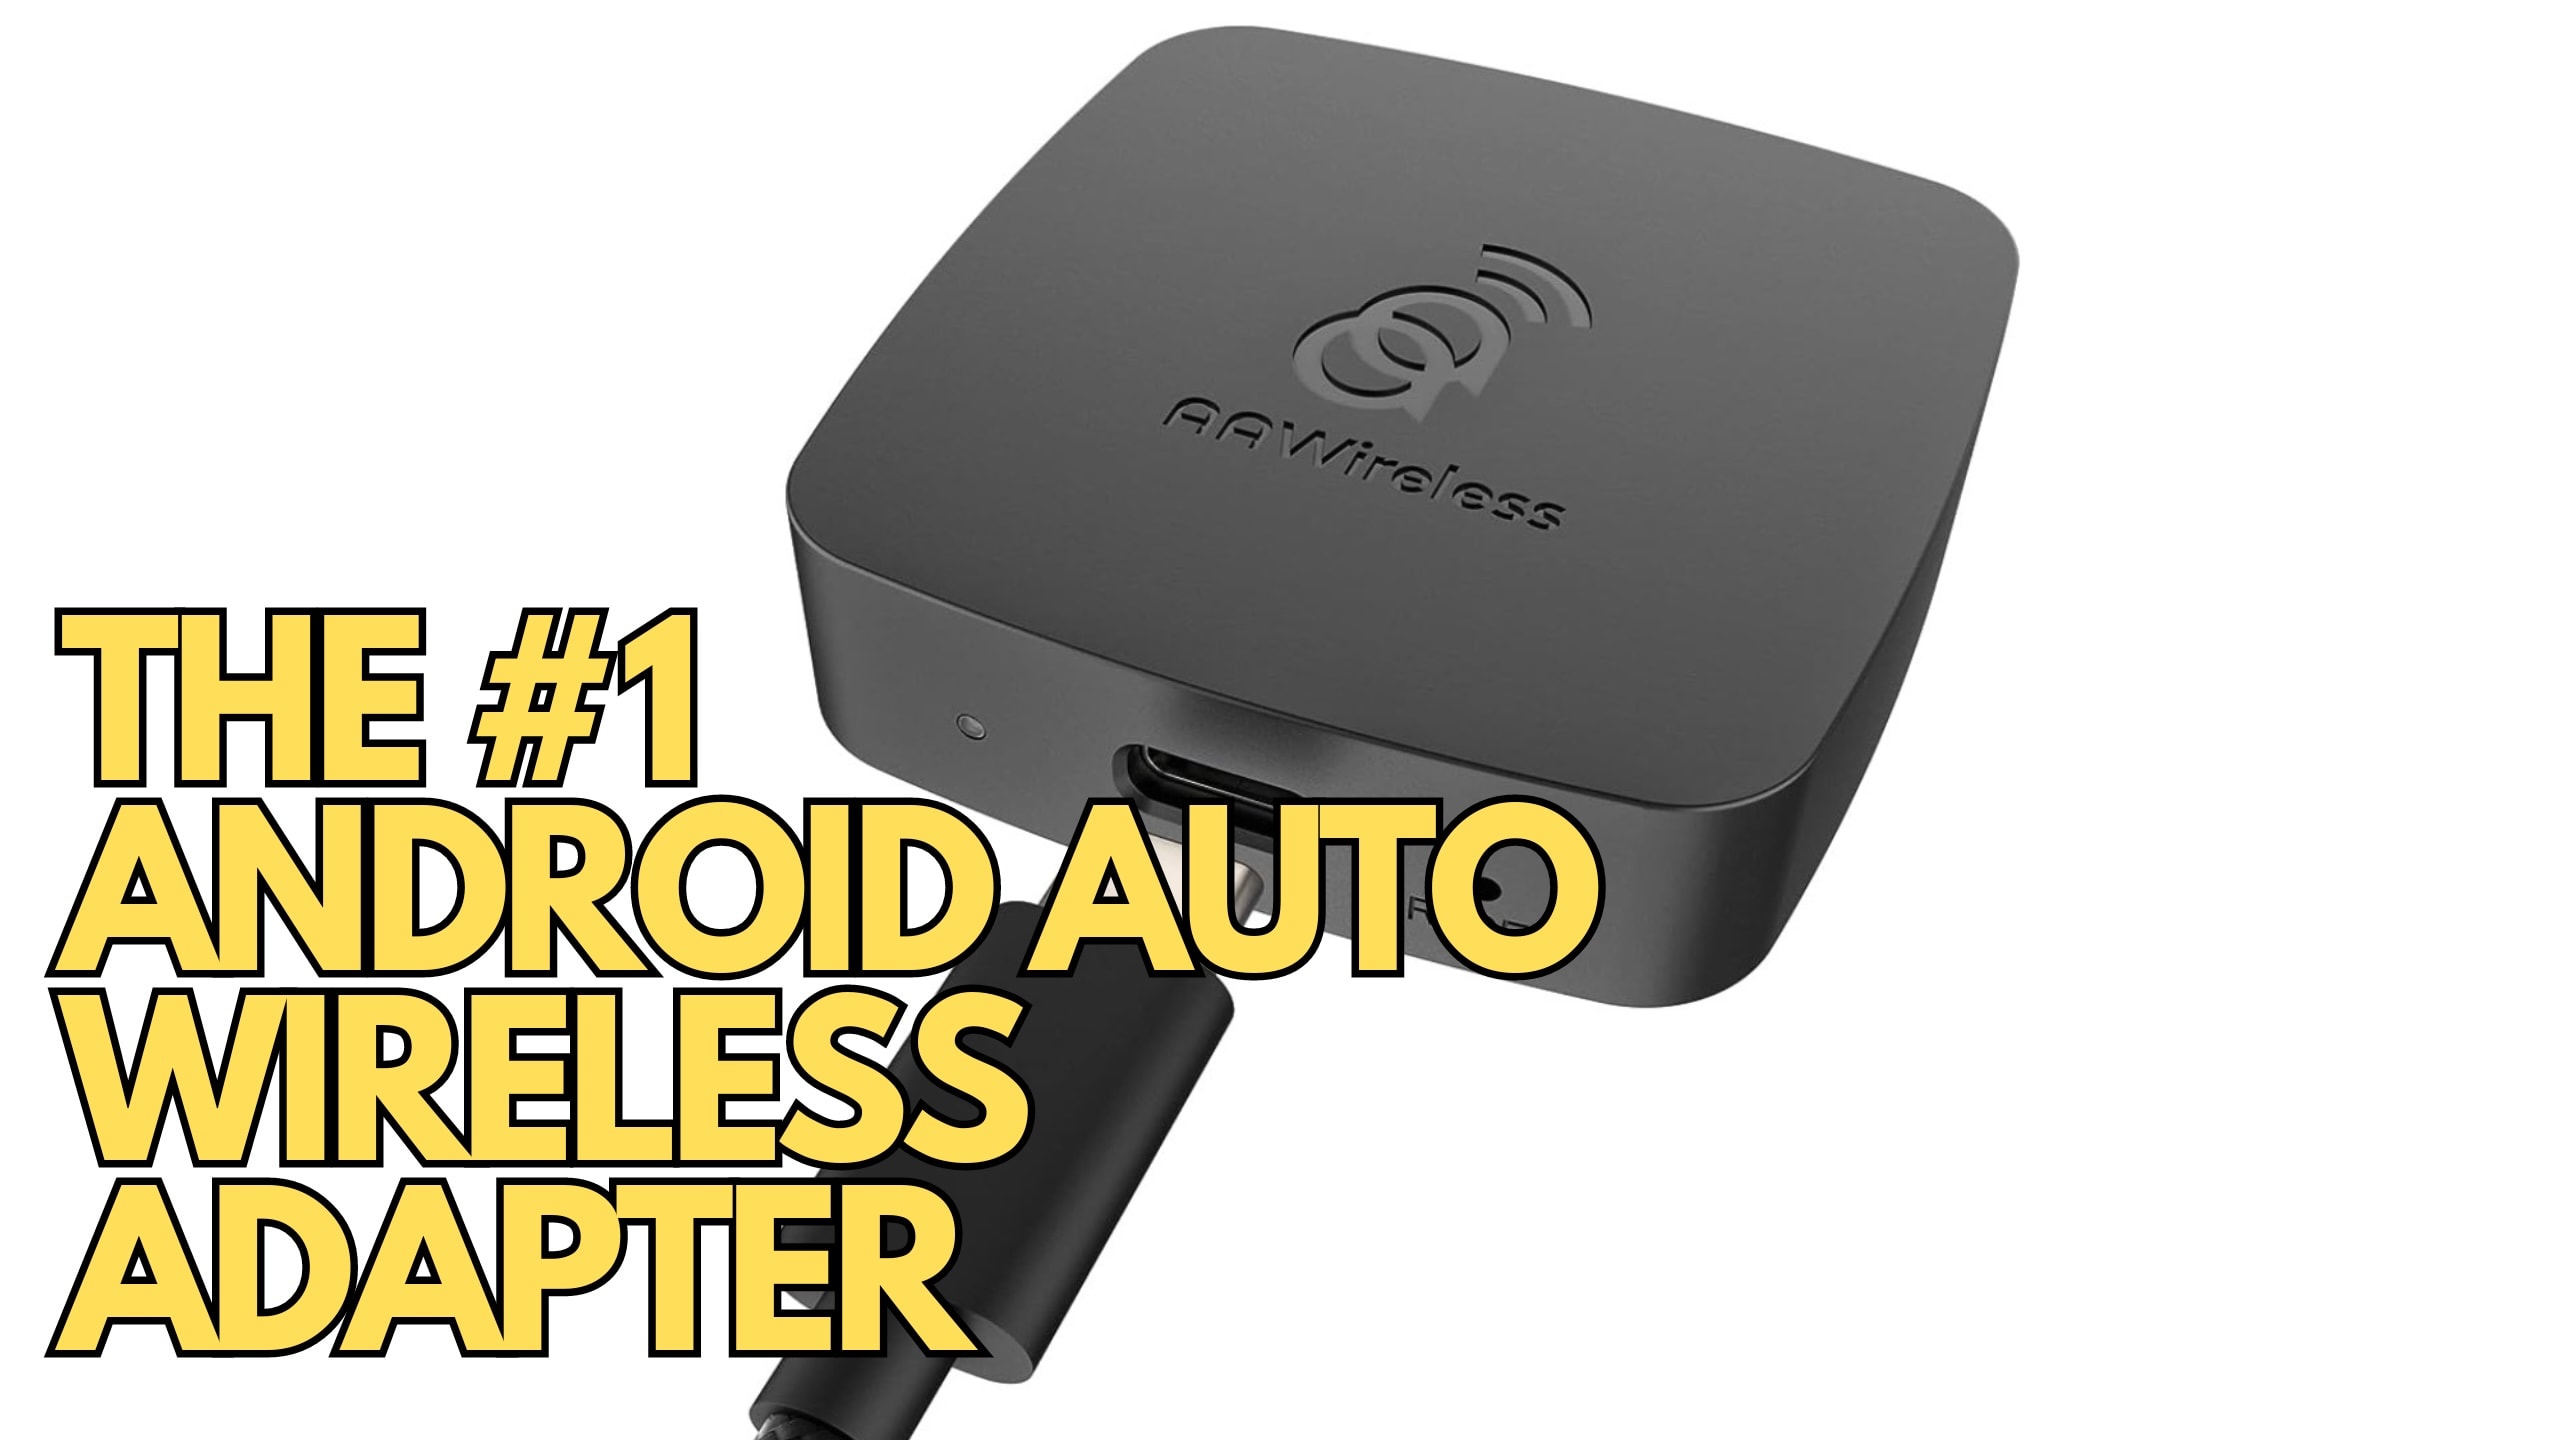 Motorola MA1 wireless Android Auto adapter announced for the